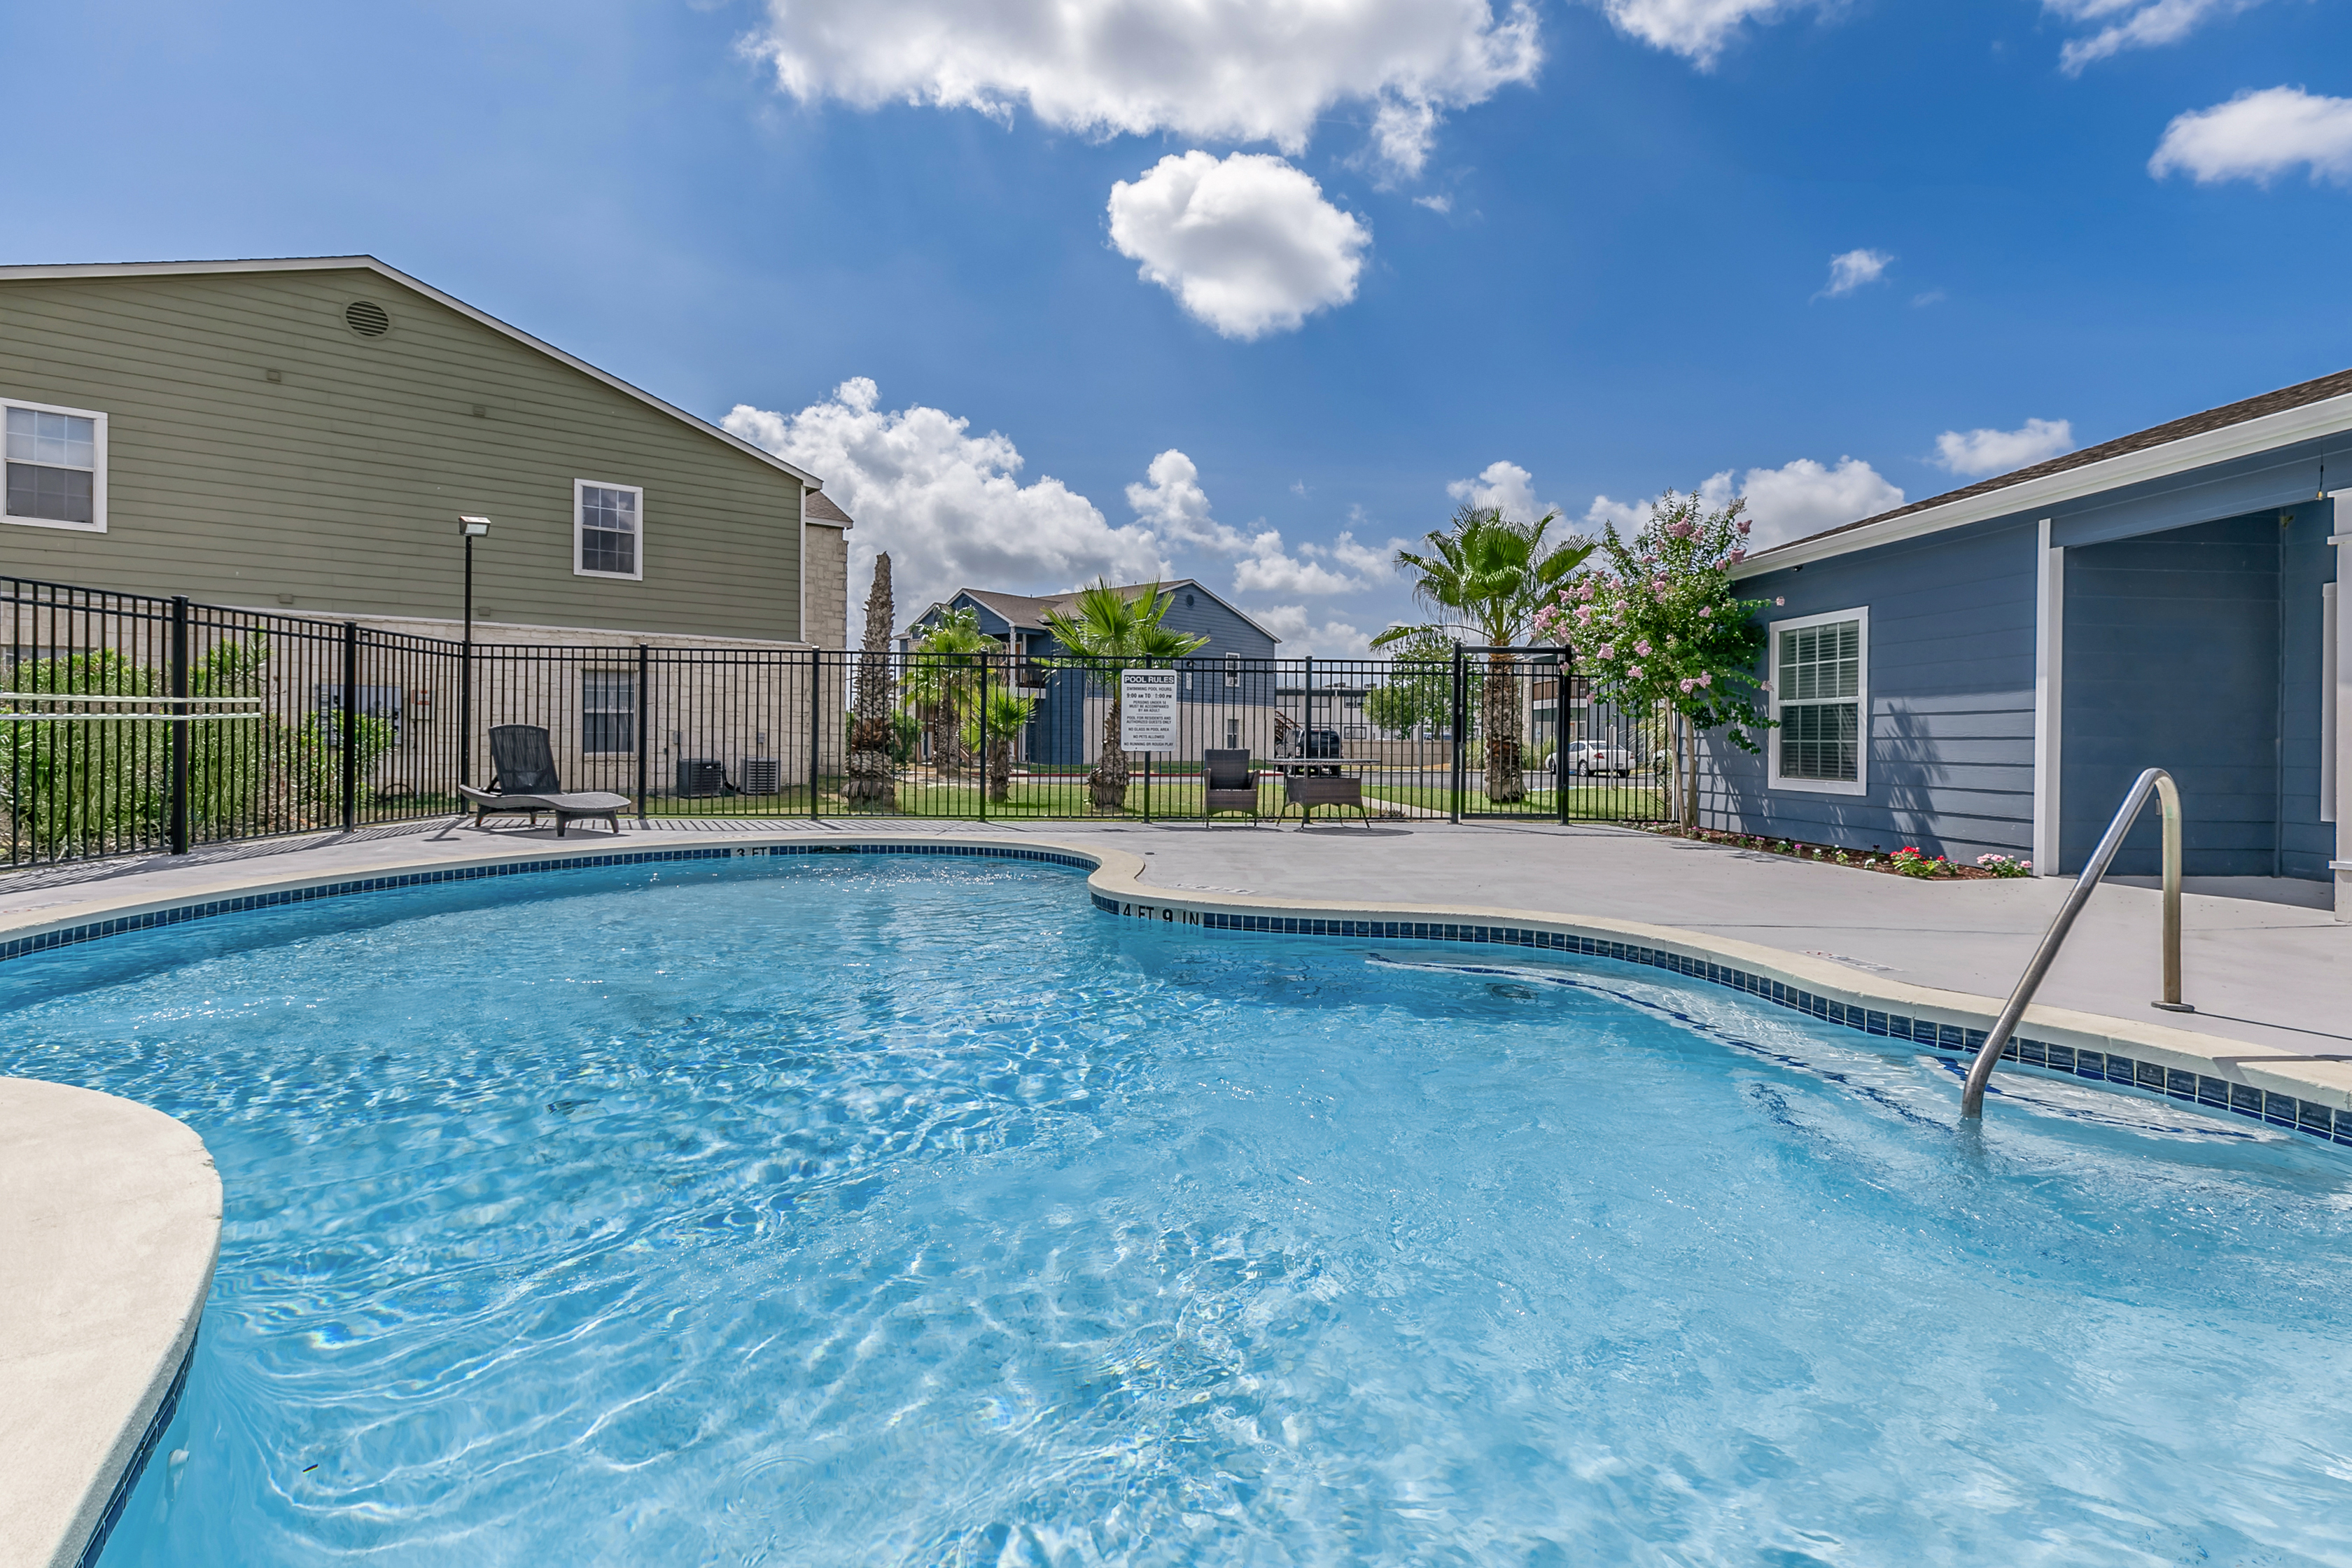 Pool with fence and steps to pool outside office. Portside Villas Apts Ingleside, TX  78362